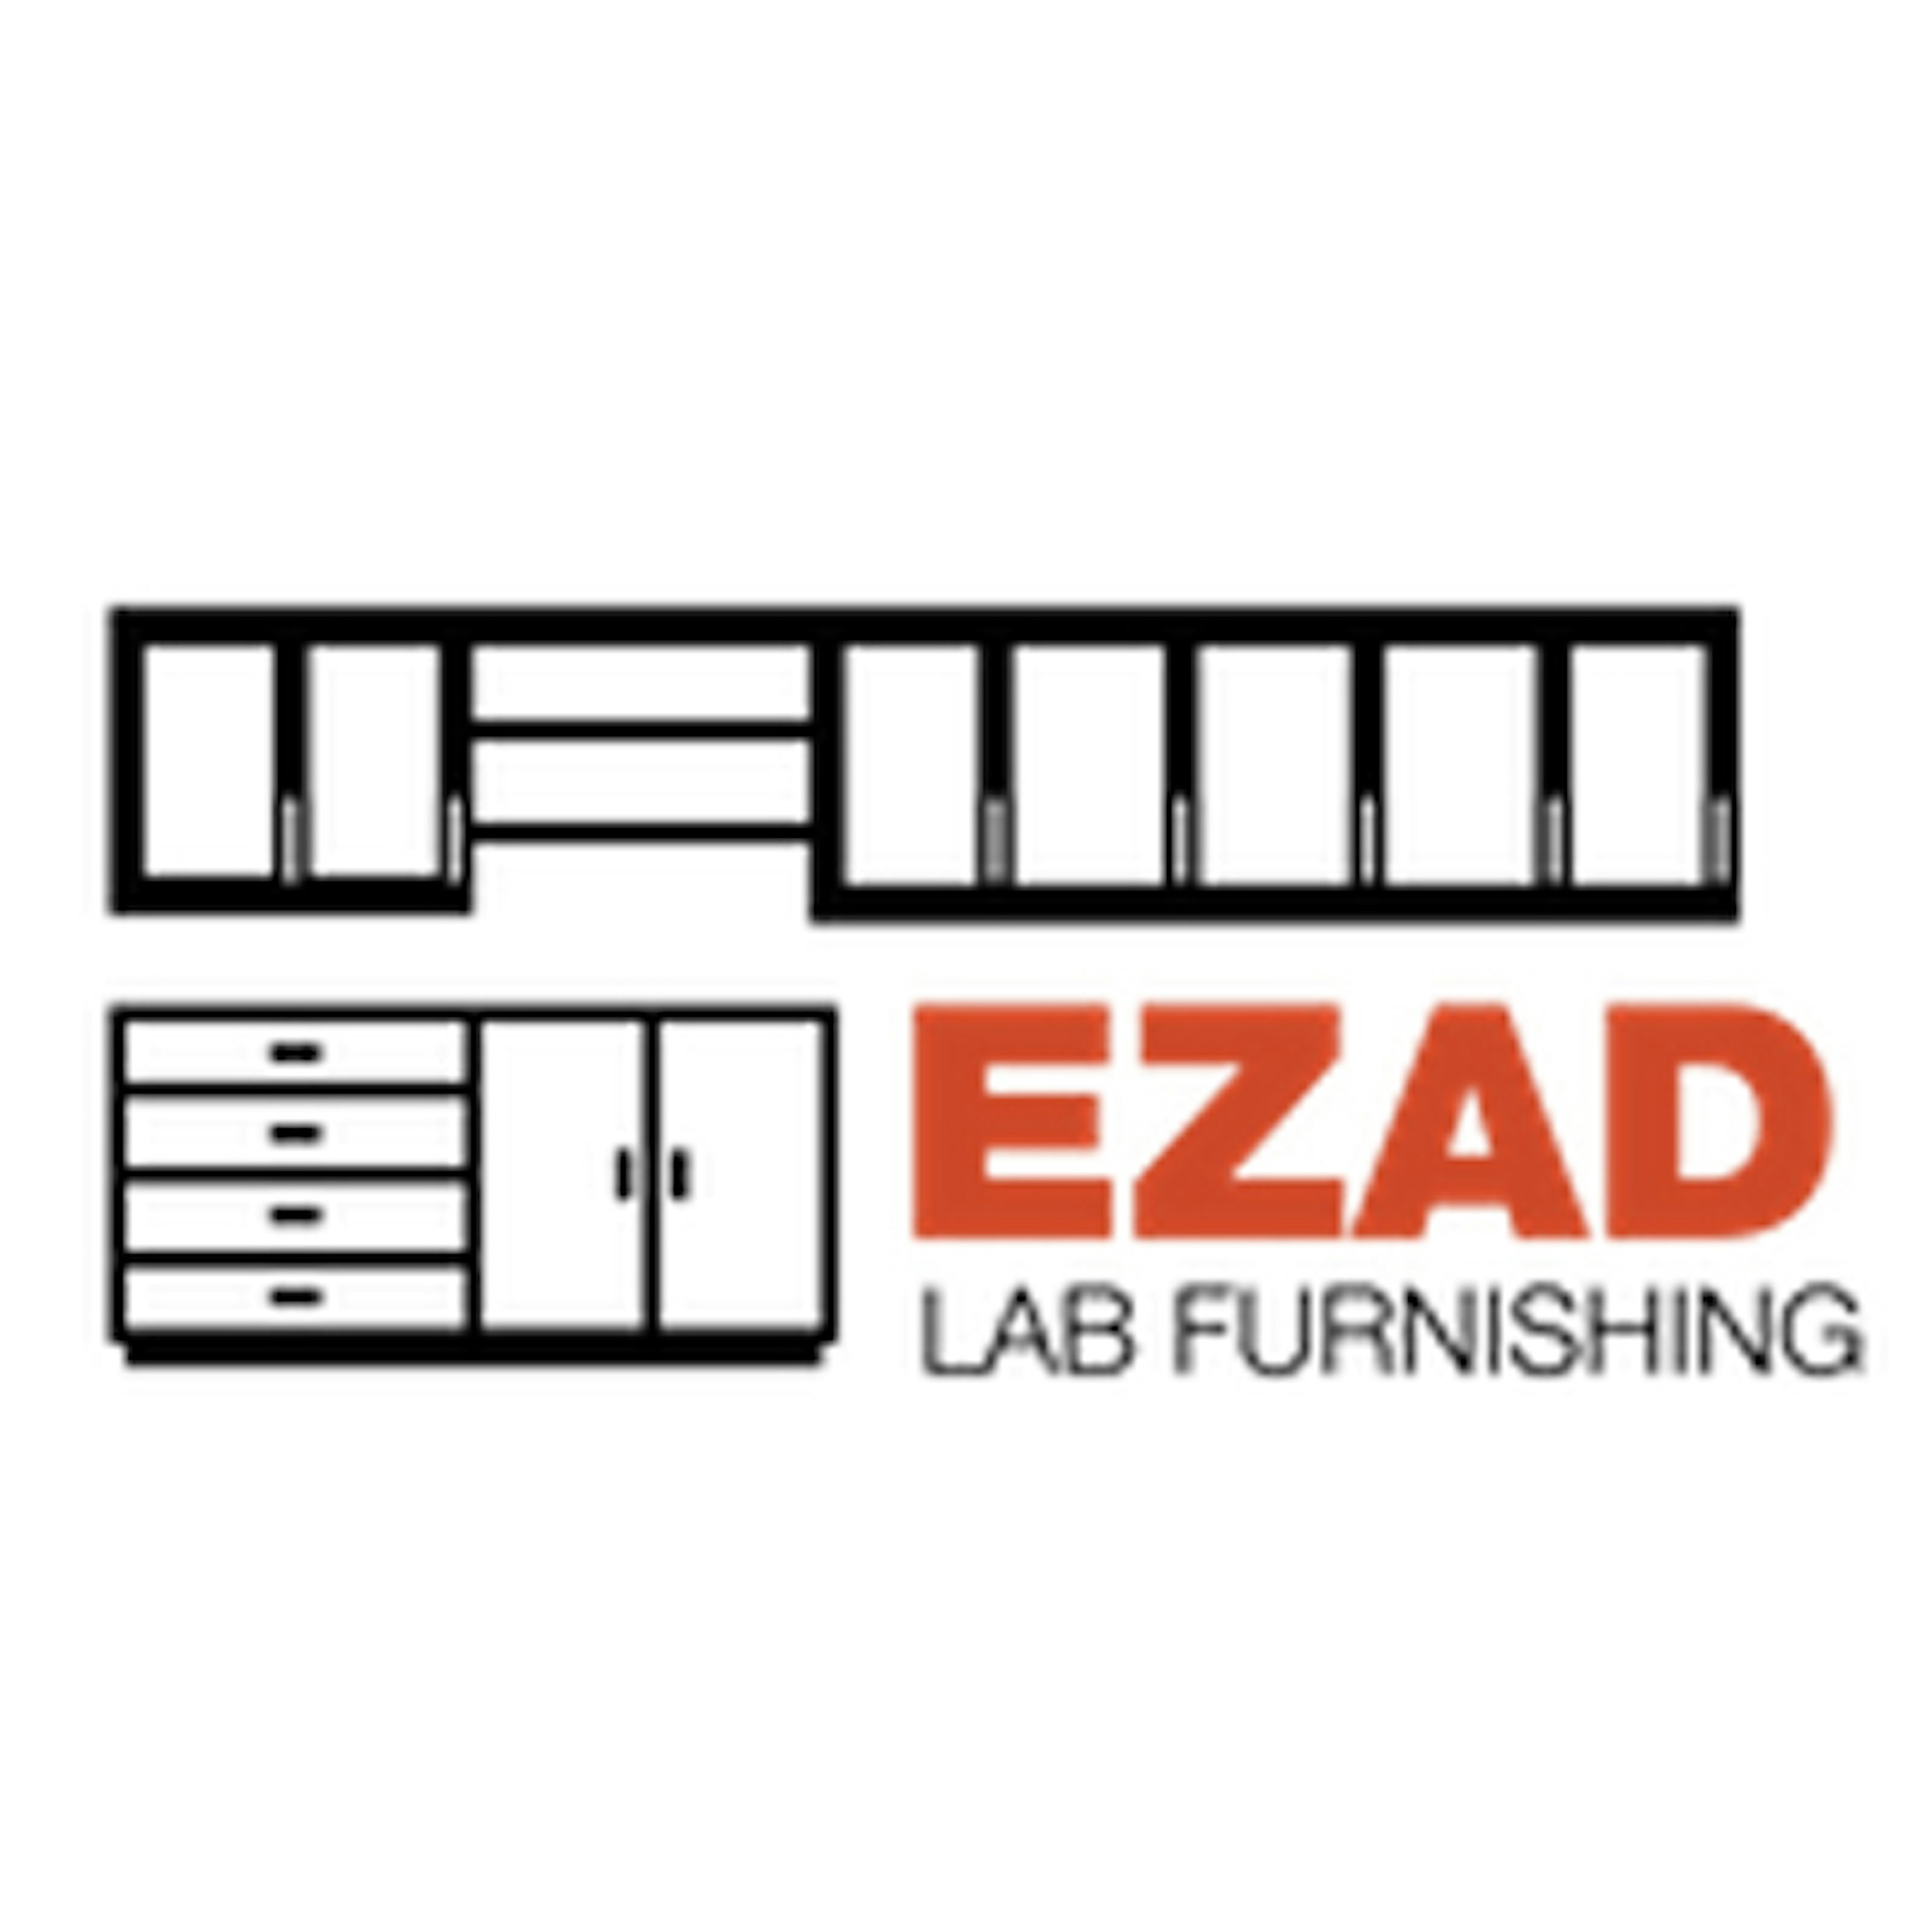 The most effective method to pick right laboratory furniture